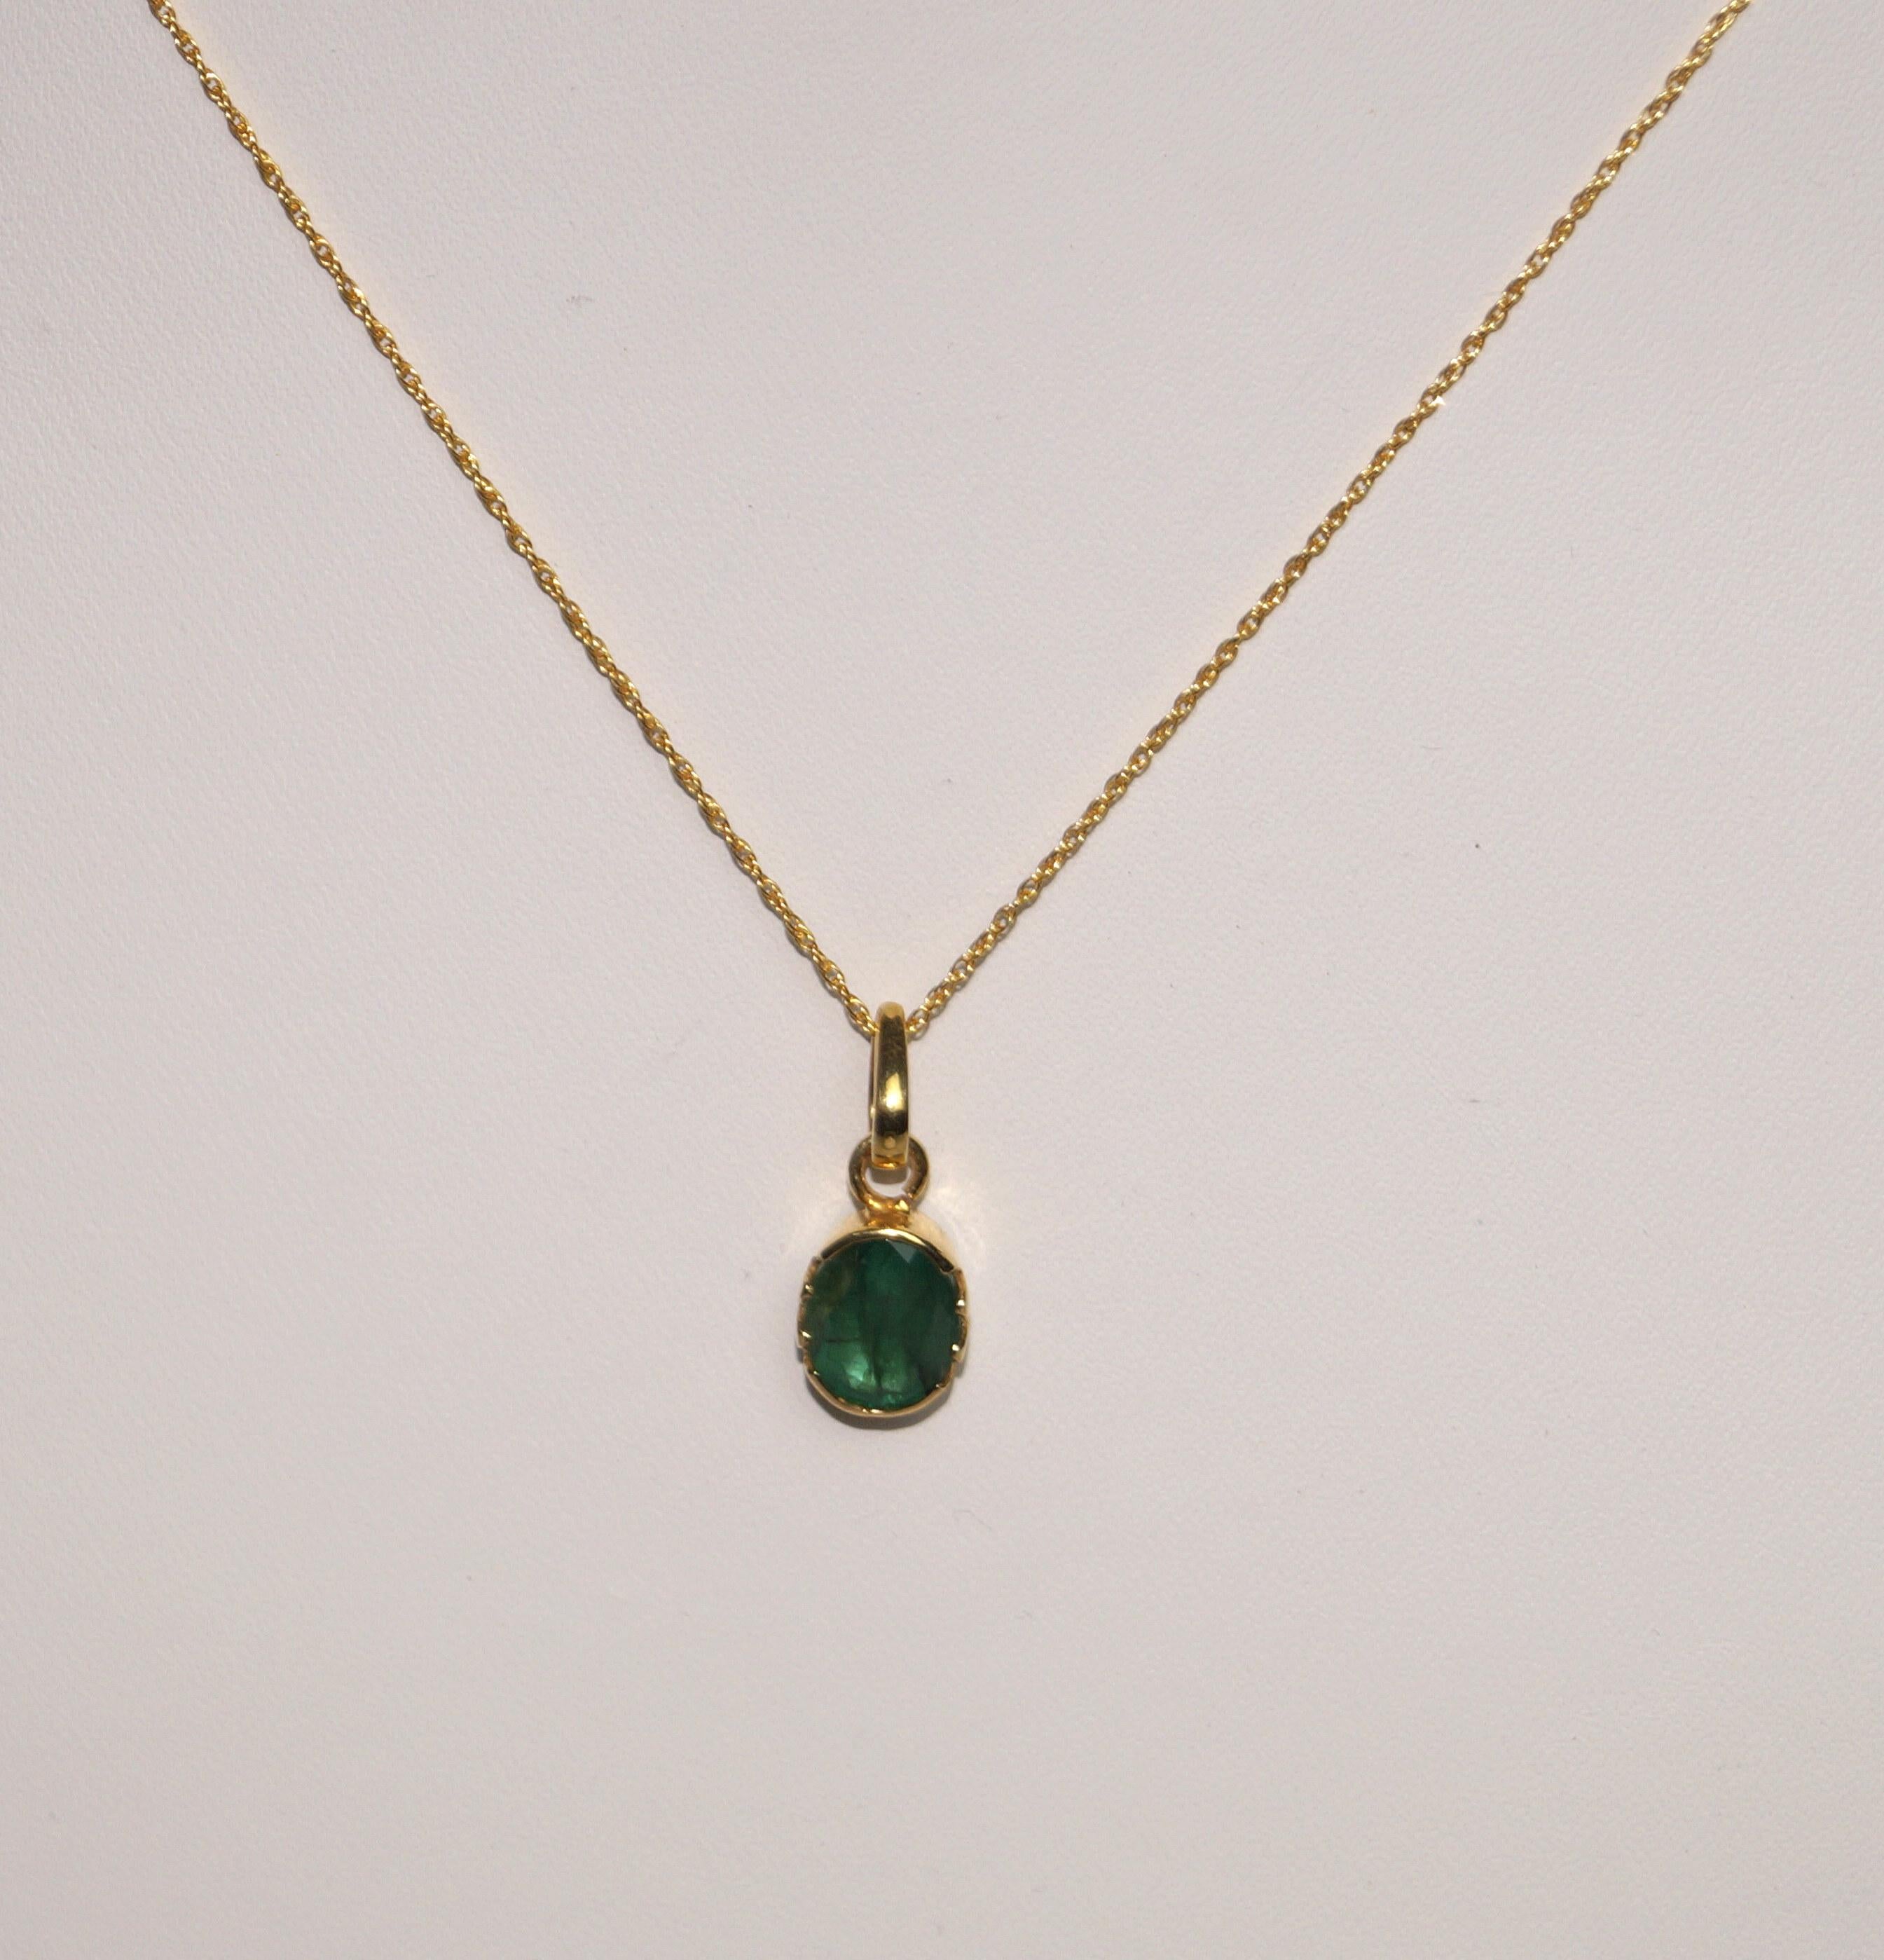 *DETAILS- (ITEM no=p8617)
-------------------------------------------------
- Gold Purity: 14k ( 585 ) (Hallmark)
- Gold Color: Yellow
-------------------------------------------------
-Gemstone-Natural Emerald (Real)
- Gem Stone Wt. : 2.10ctw
- No.